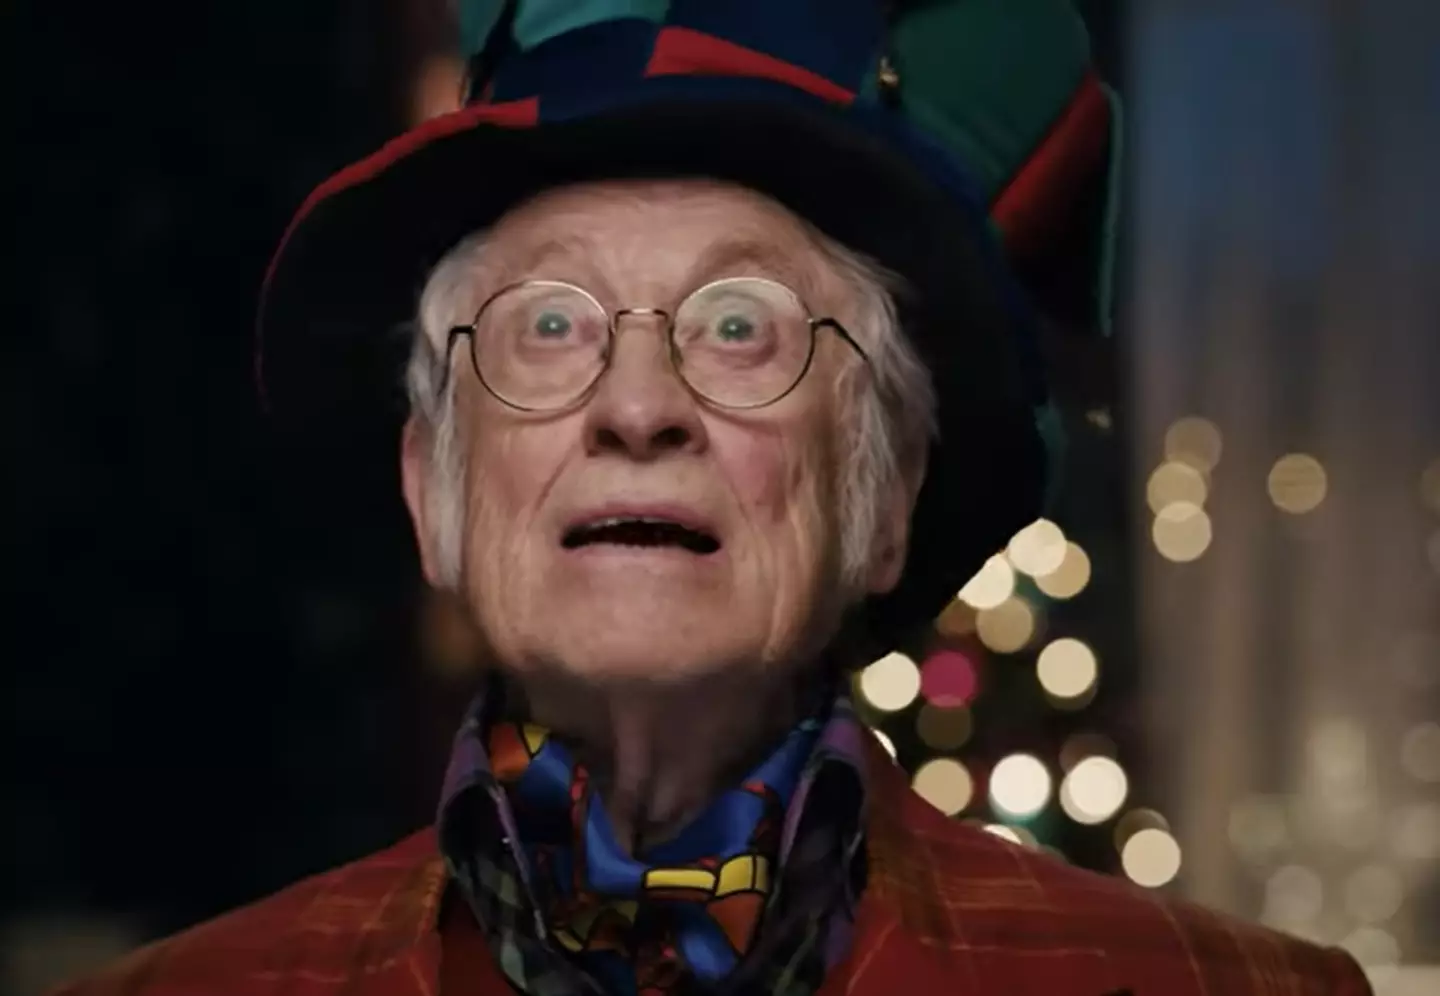 Noddy Holder appeared in Iceland's Christmas advert last year, but he's not been asked back this time.